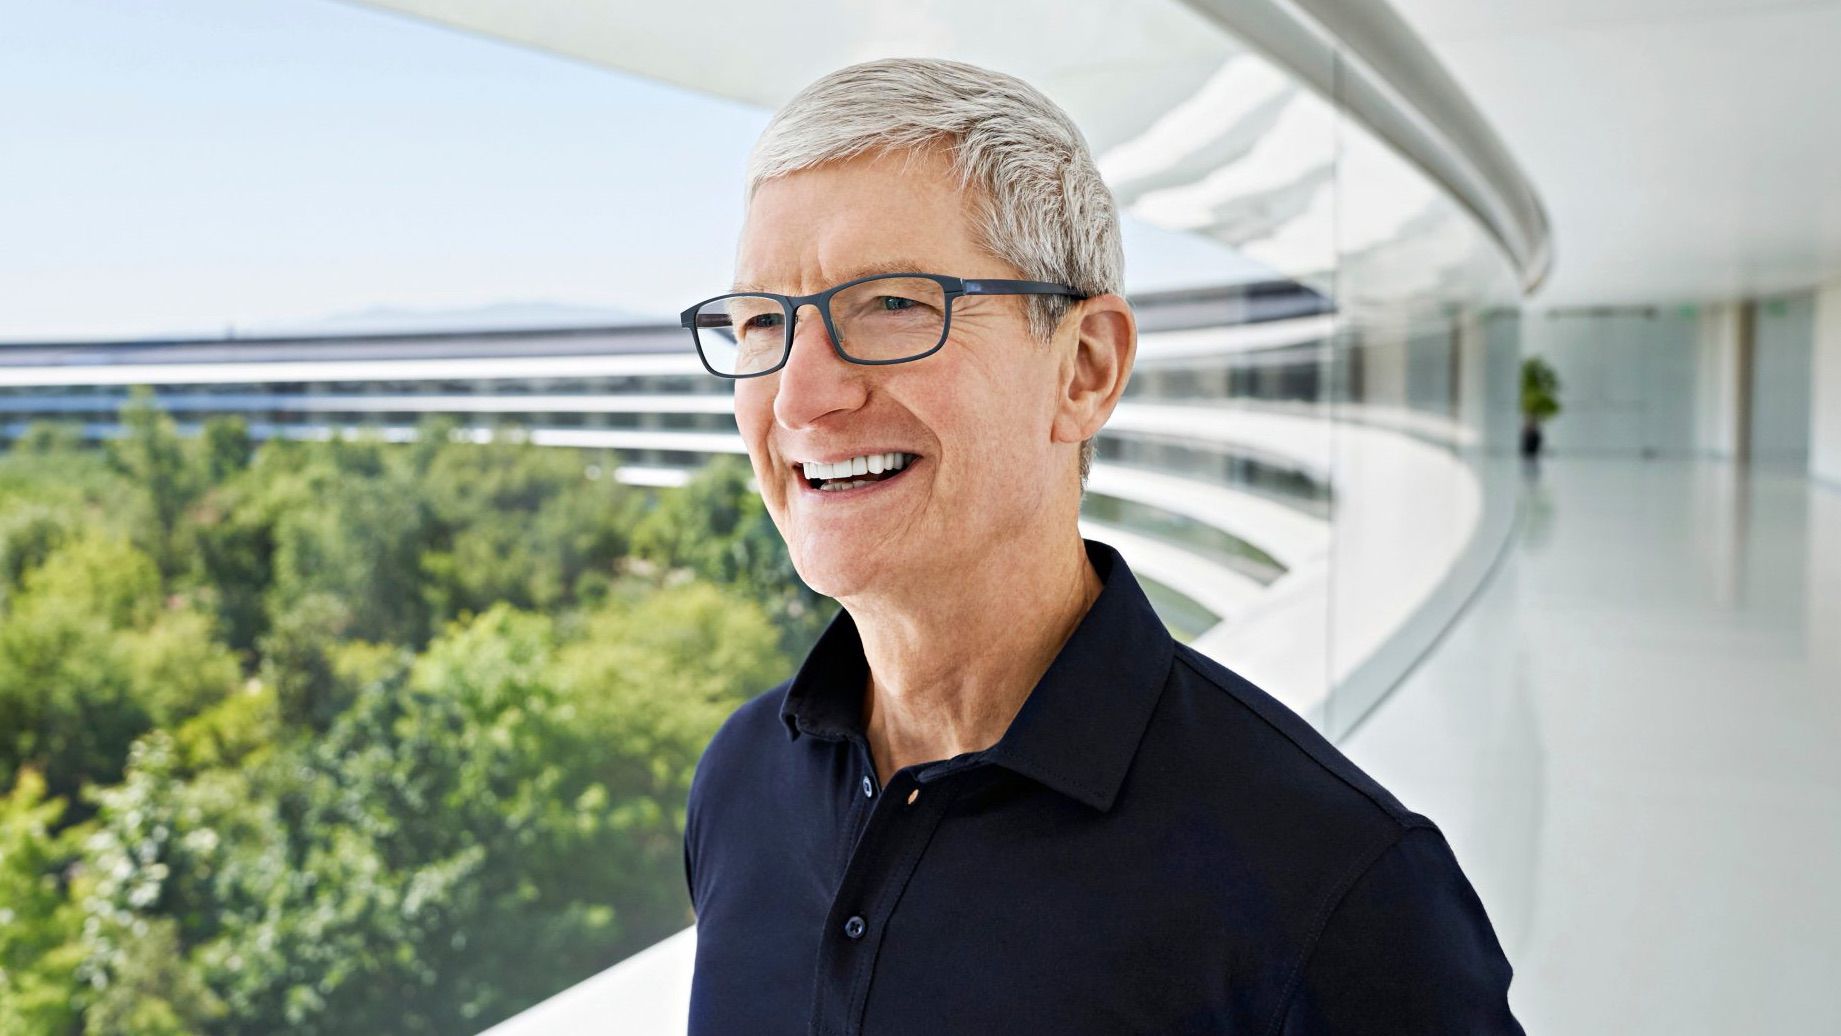 What Is Apple CEO Tim Cook’s Email Address?